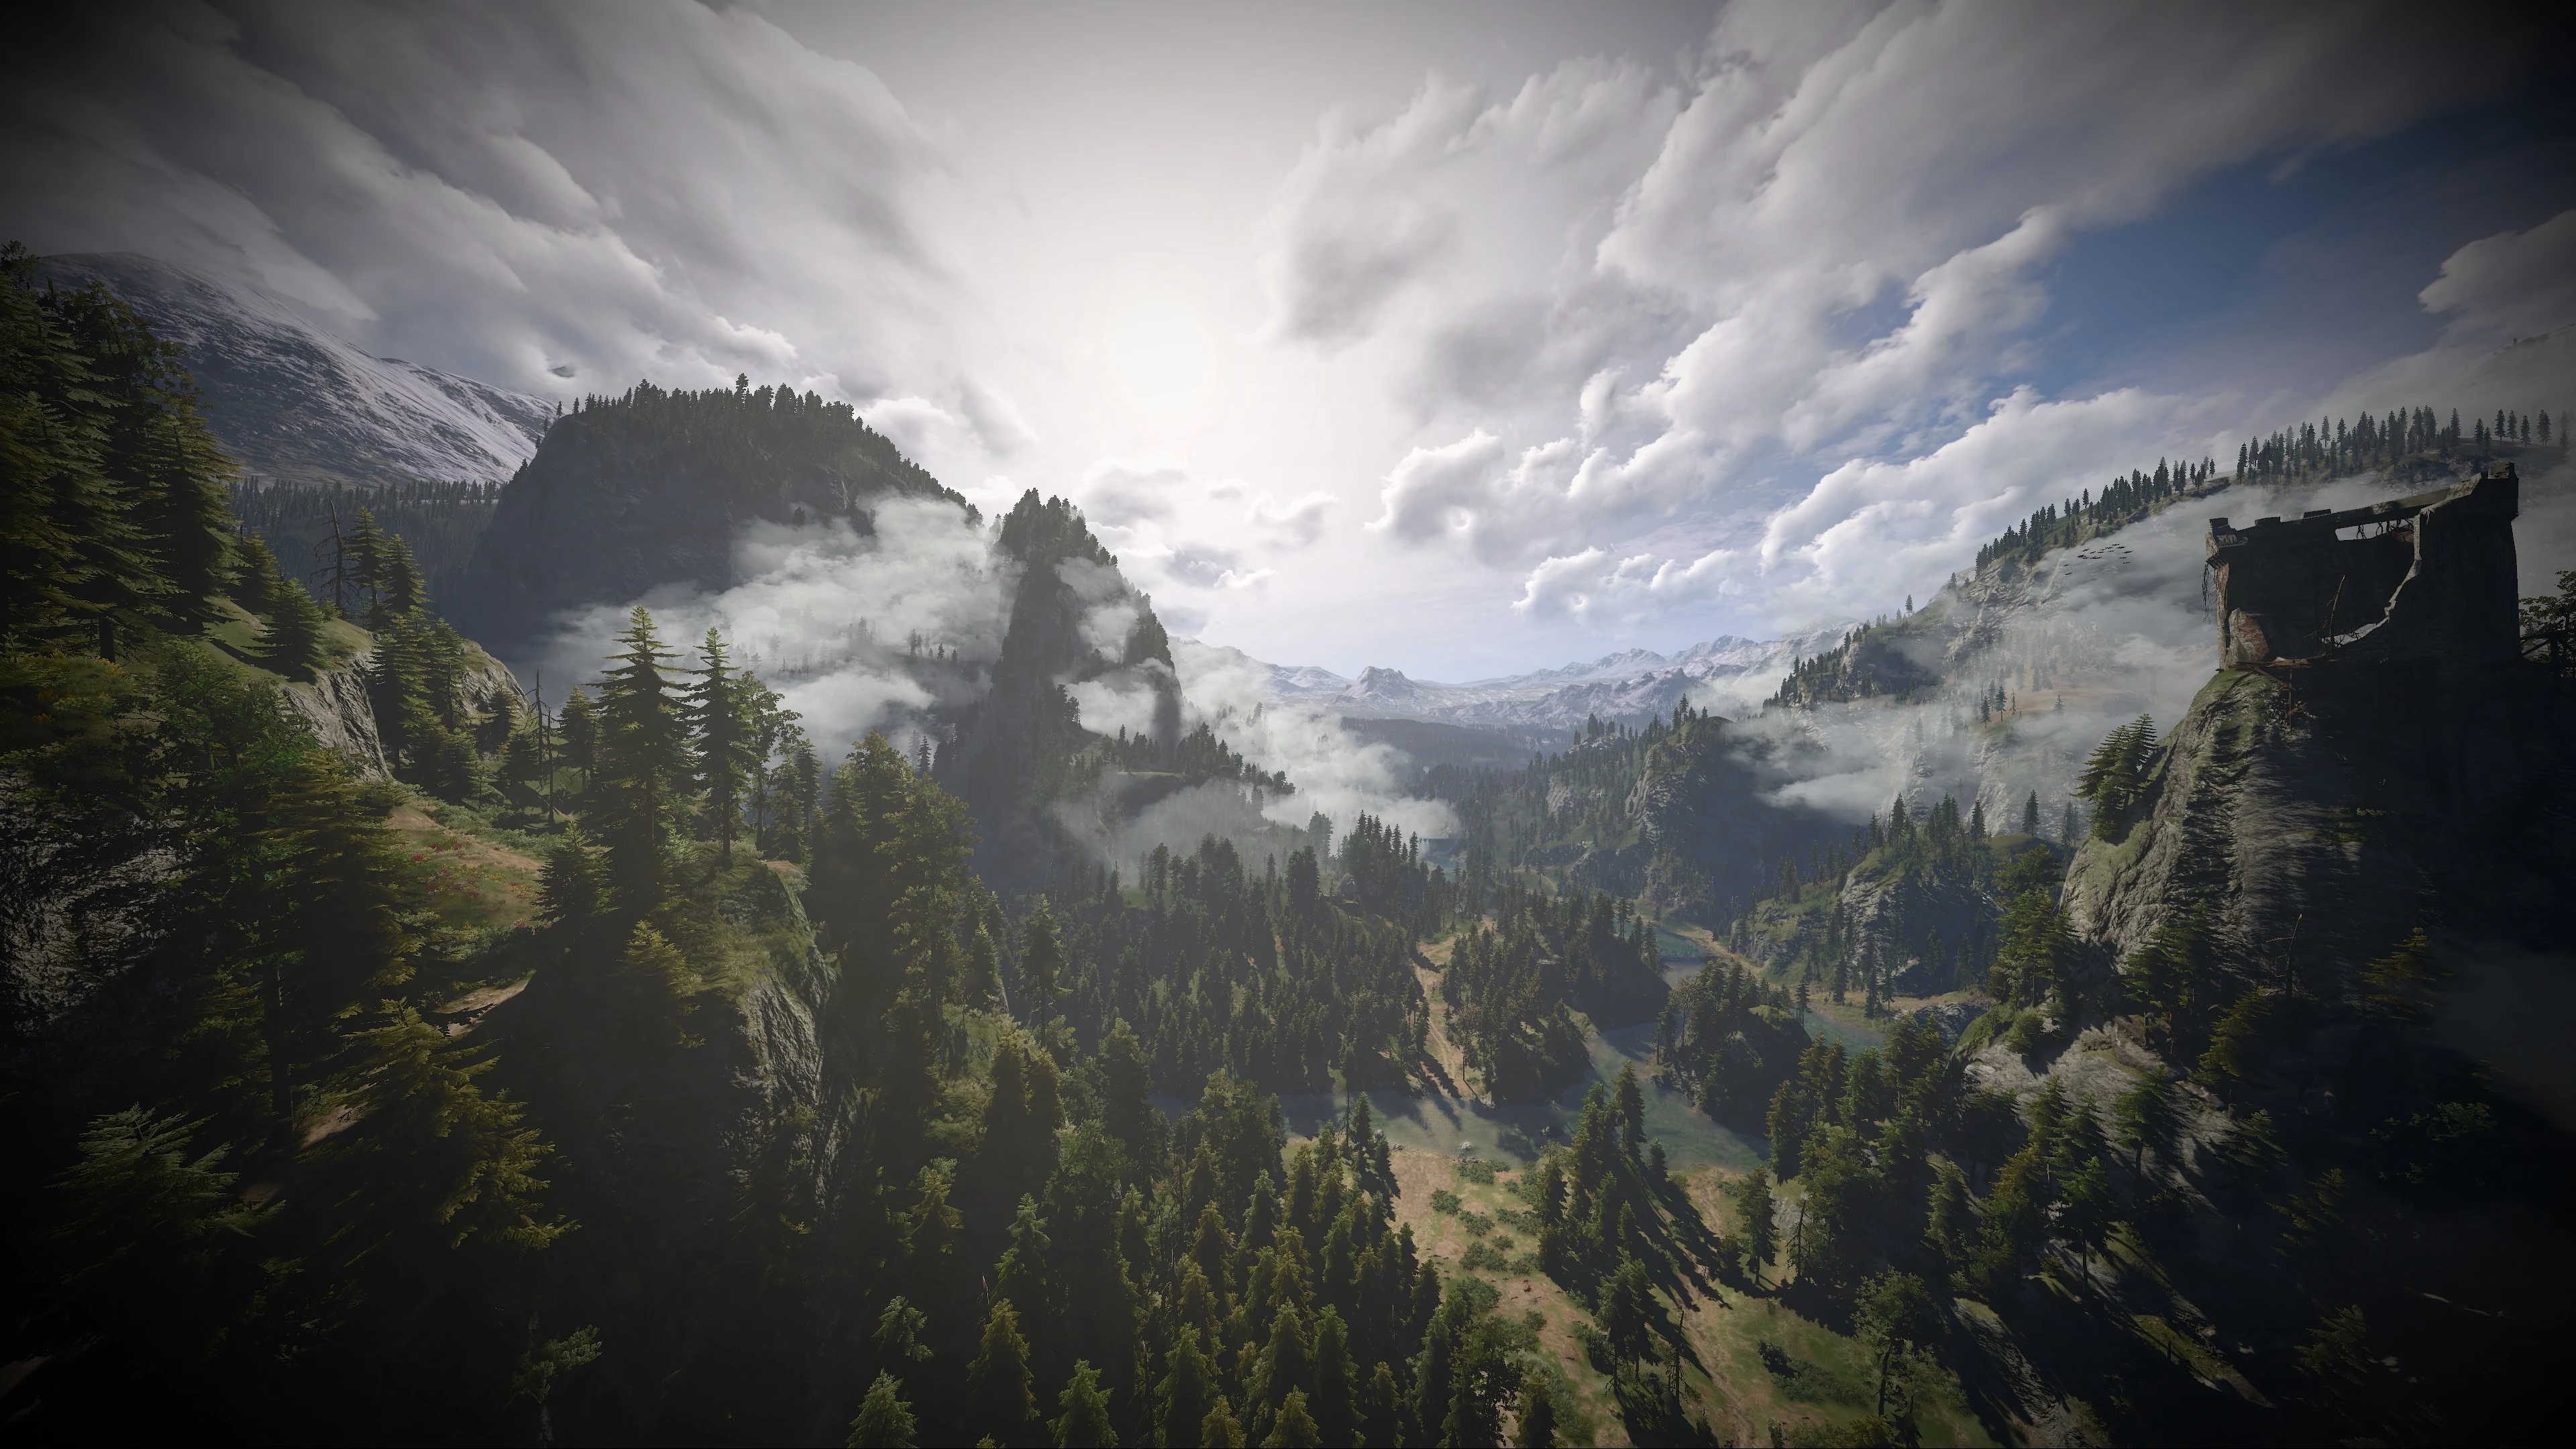 The witcher 3 mac os фото 38